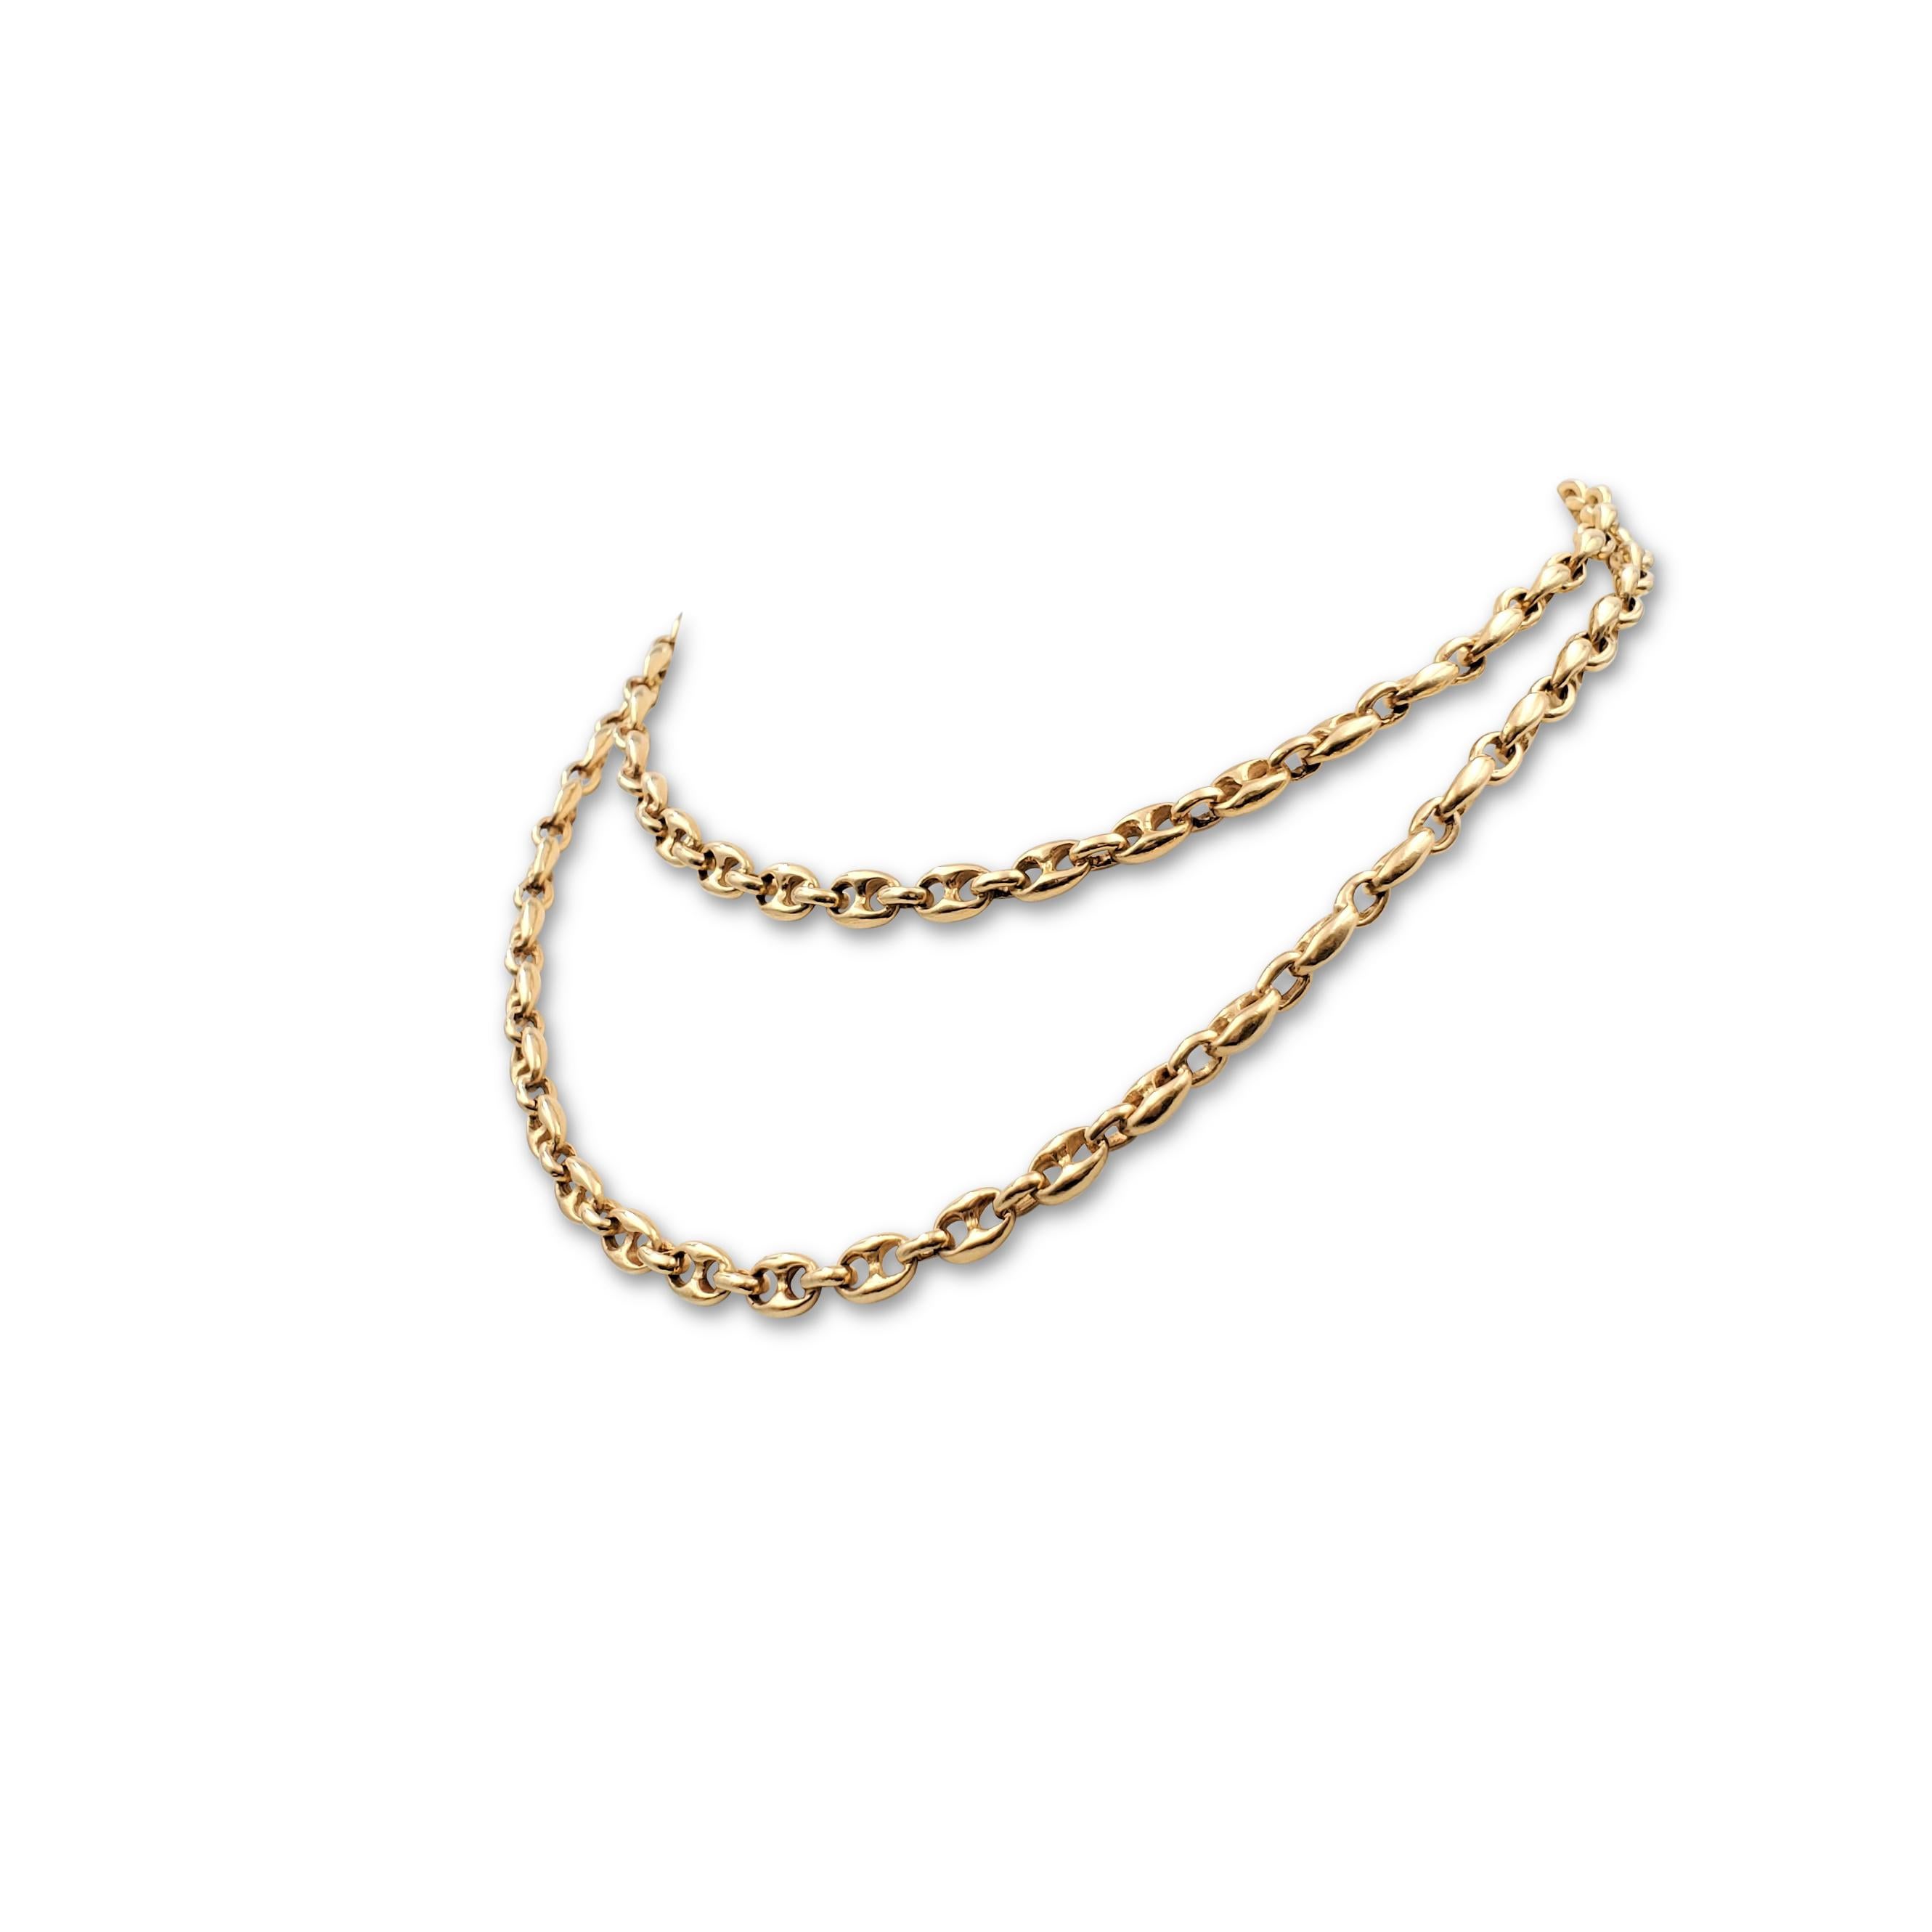 A wearable chain necklace crafted in 14 karat yellow gold comprised of small anchor links alternating with oval-shaped connectors. The chain is long enough to slip overhead, as it has no clasp. The necklace measures 34 inches in length. Not